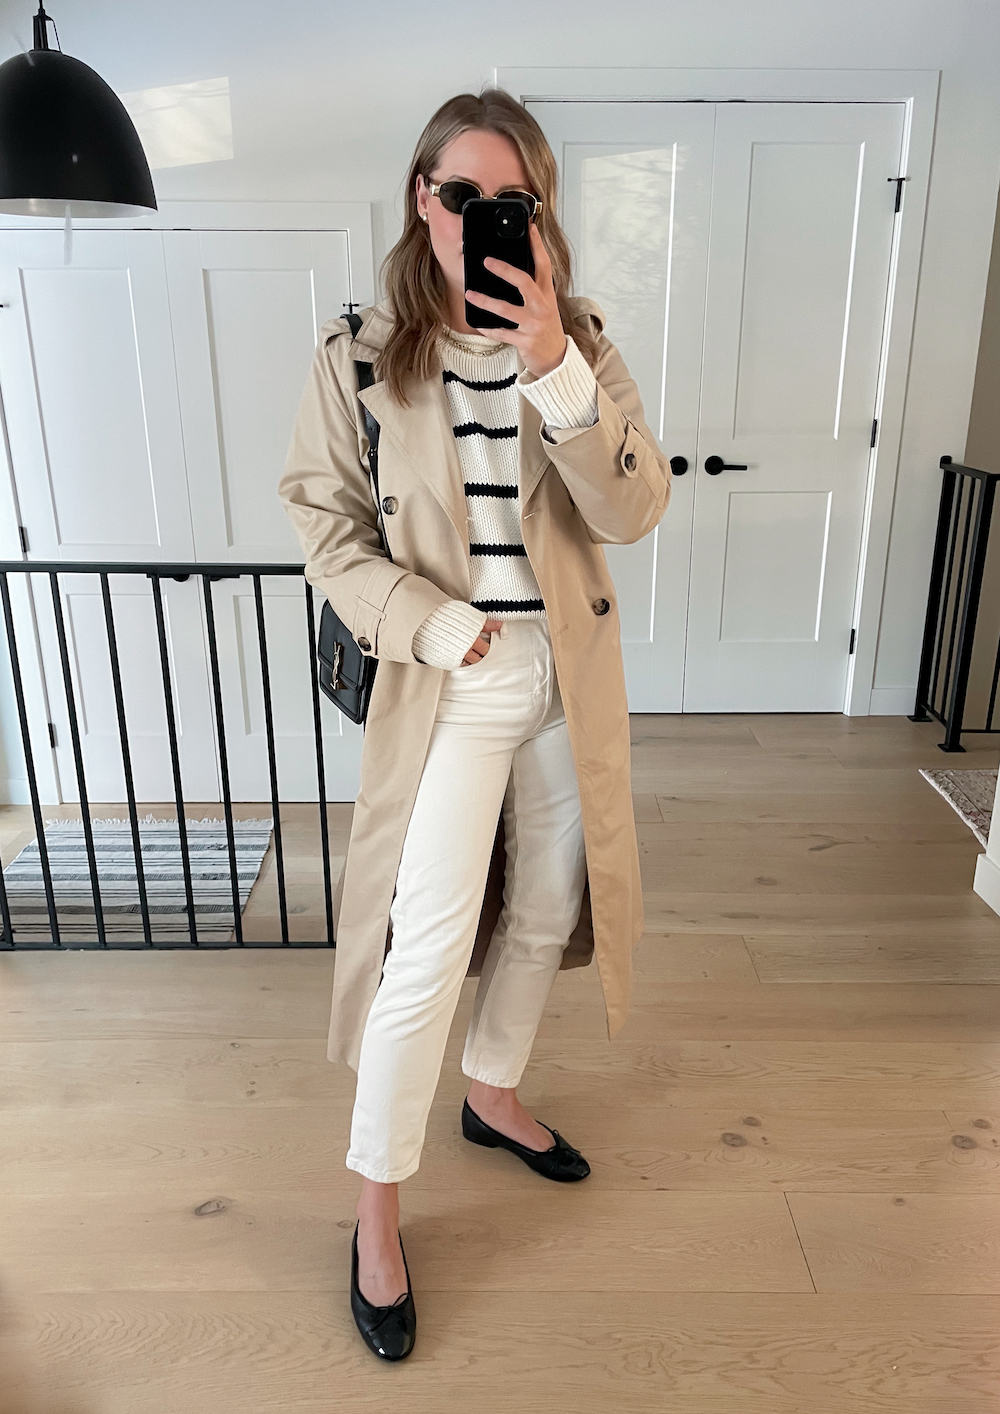 Christal wearing white jeans, black ballet flats, a black and white striped sweater and a tan trench coat.